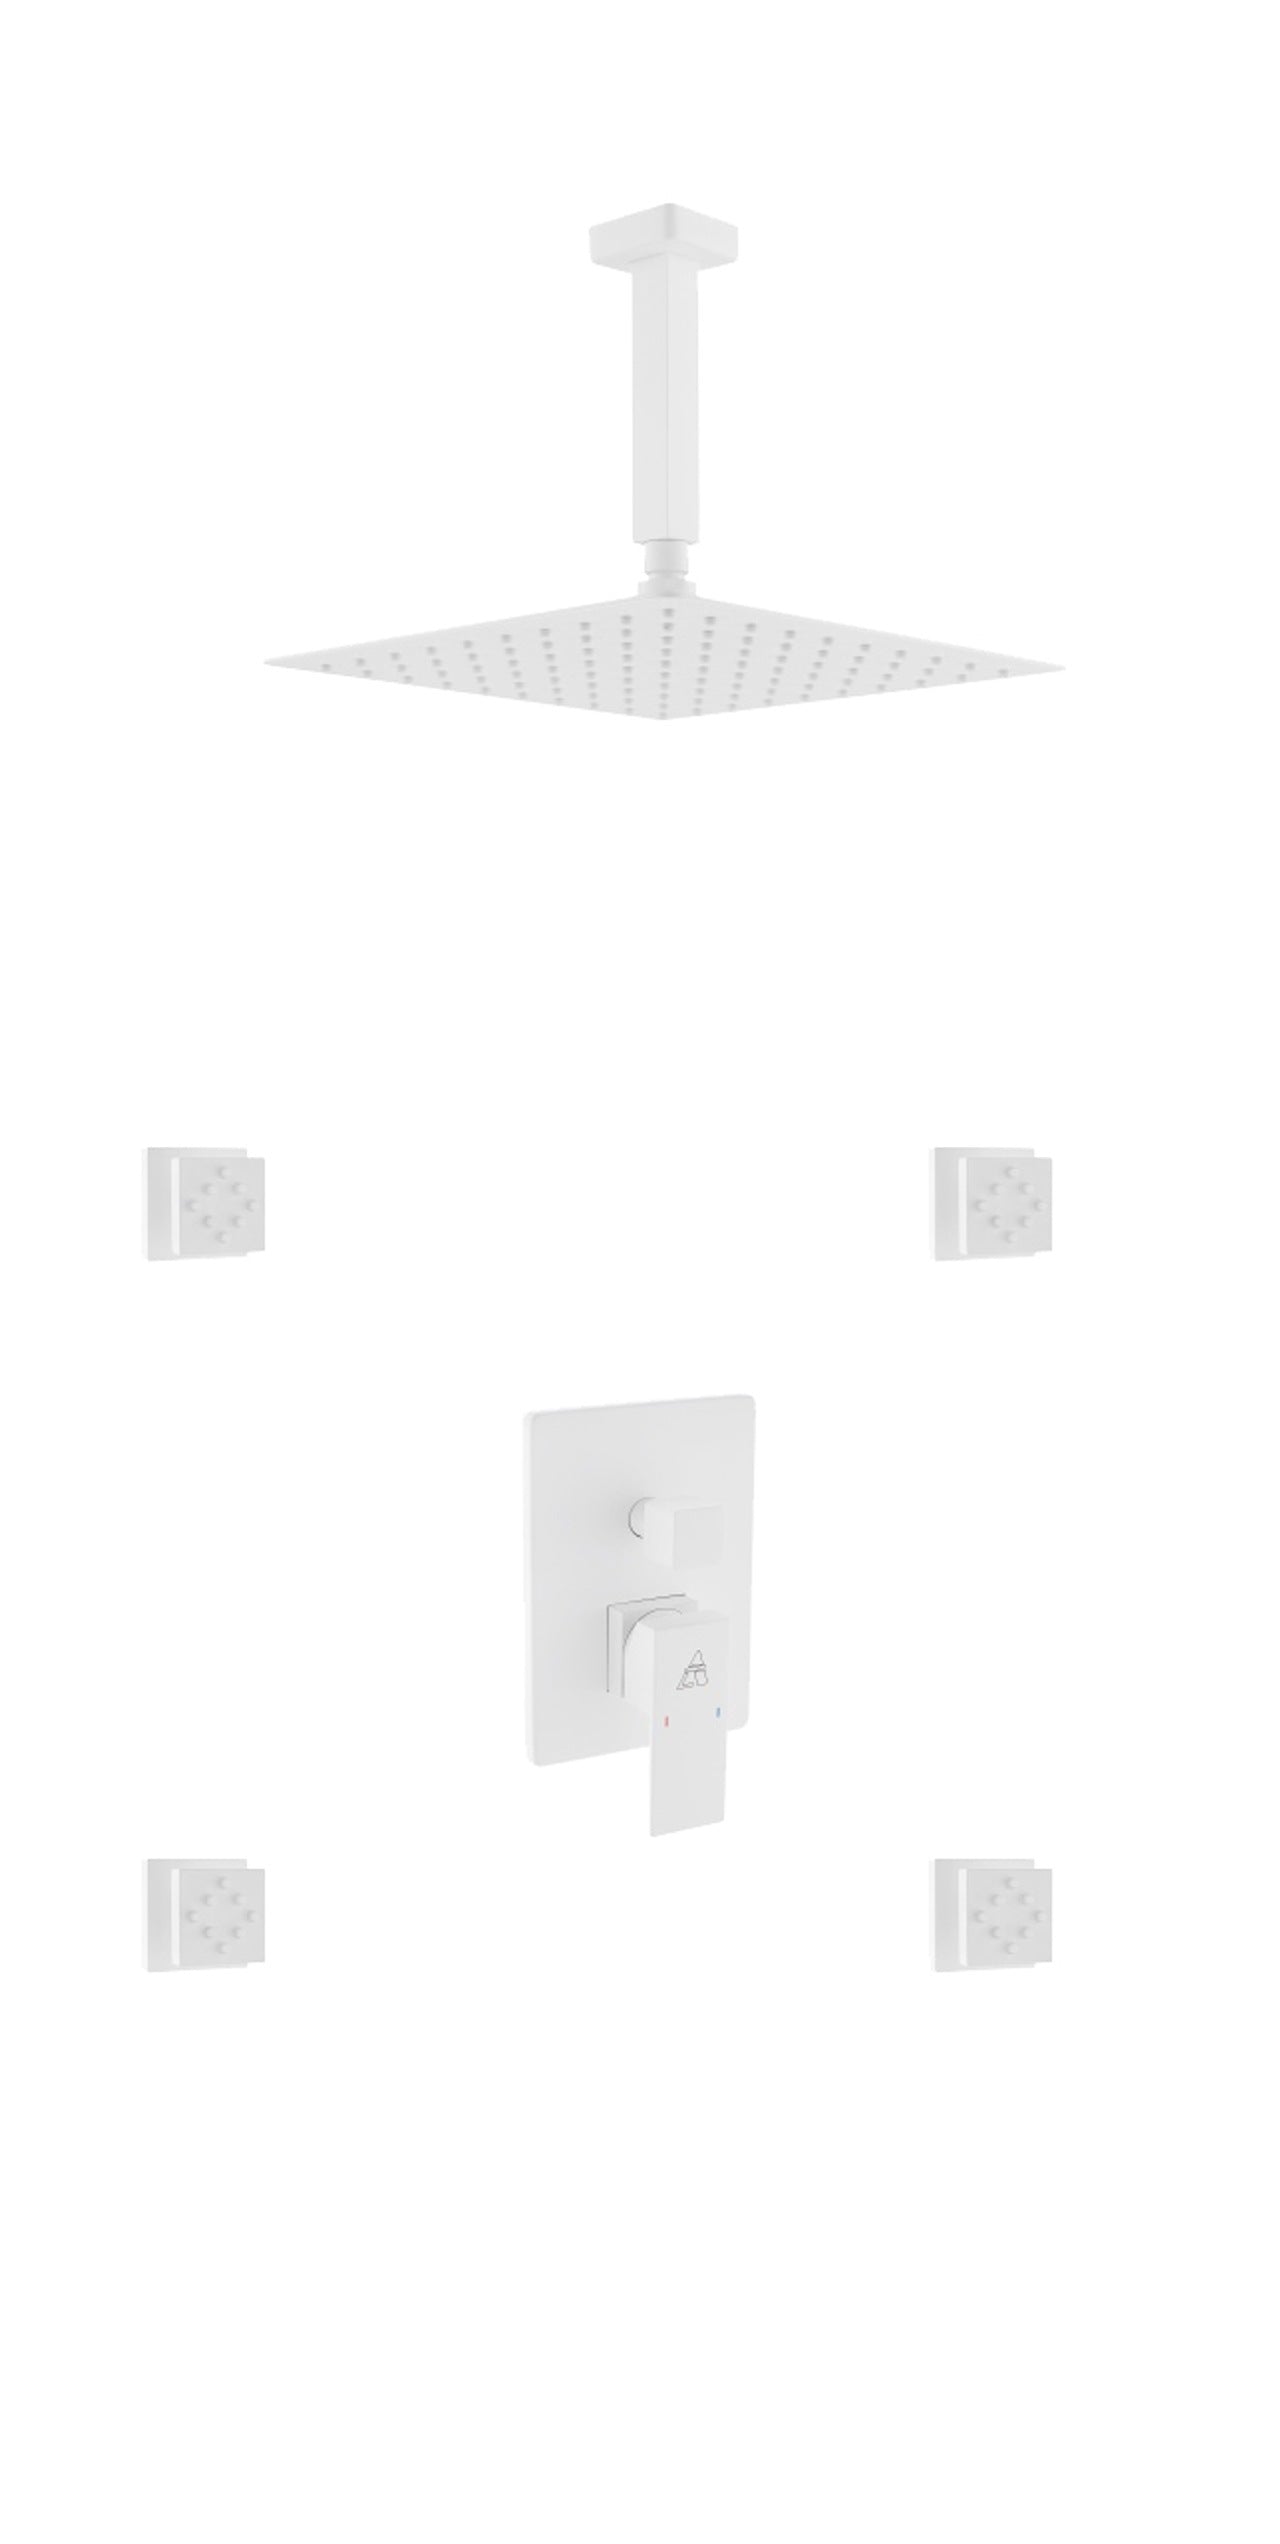 Aqua Piazza White Shower Set w/ 12″ Ceiling Mount Square Rain Shower and 4 Body Jets